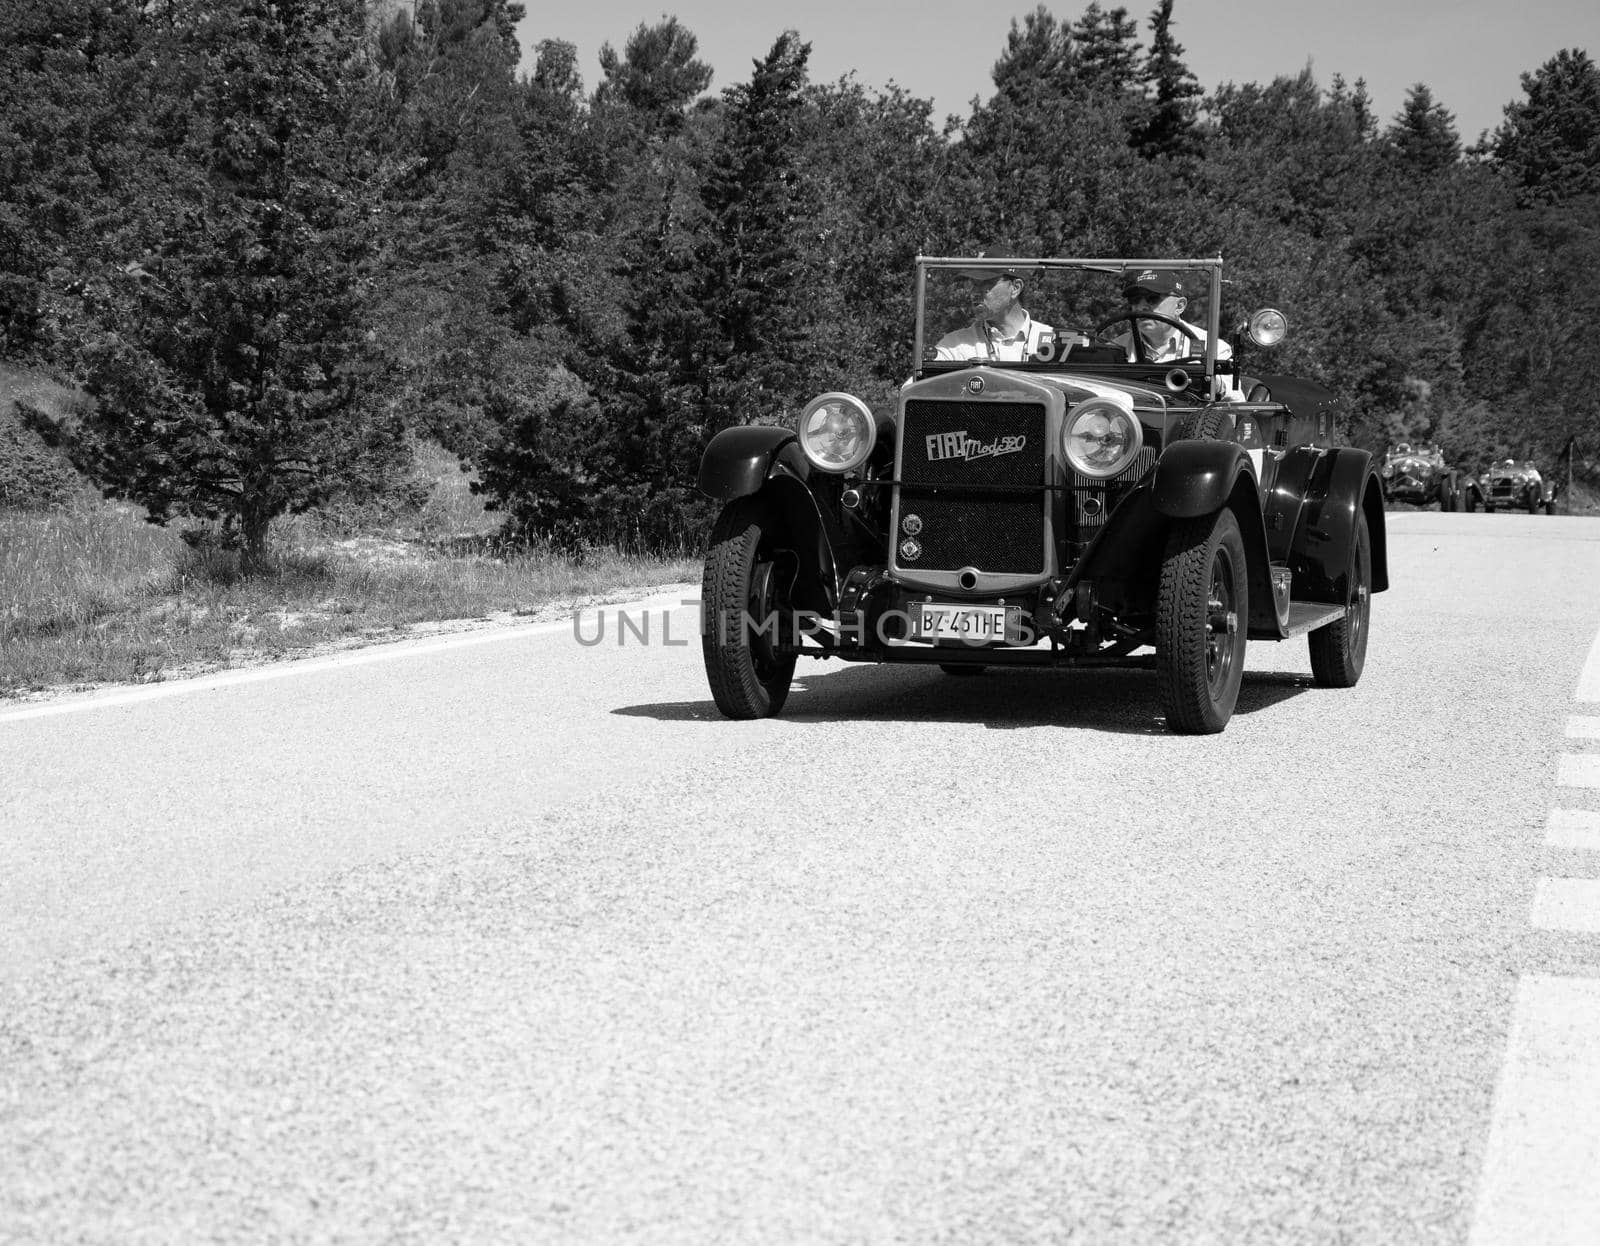 URBINO - ITALY - JUN 16 - 2022 : FIAT 520 1929 on an old racing car in rally Mille Miglia 2022 the famous italian historical race (1927-1957